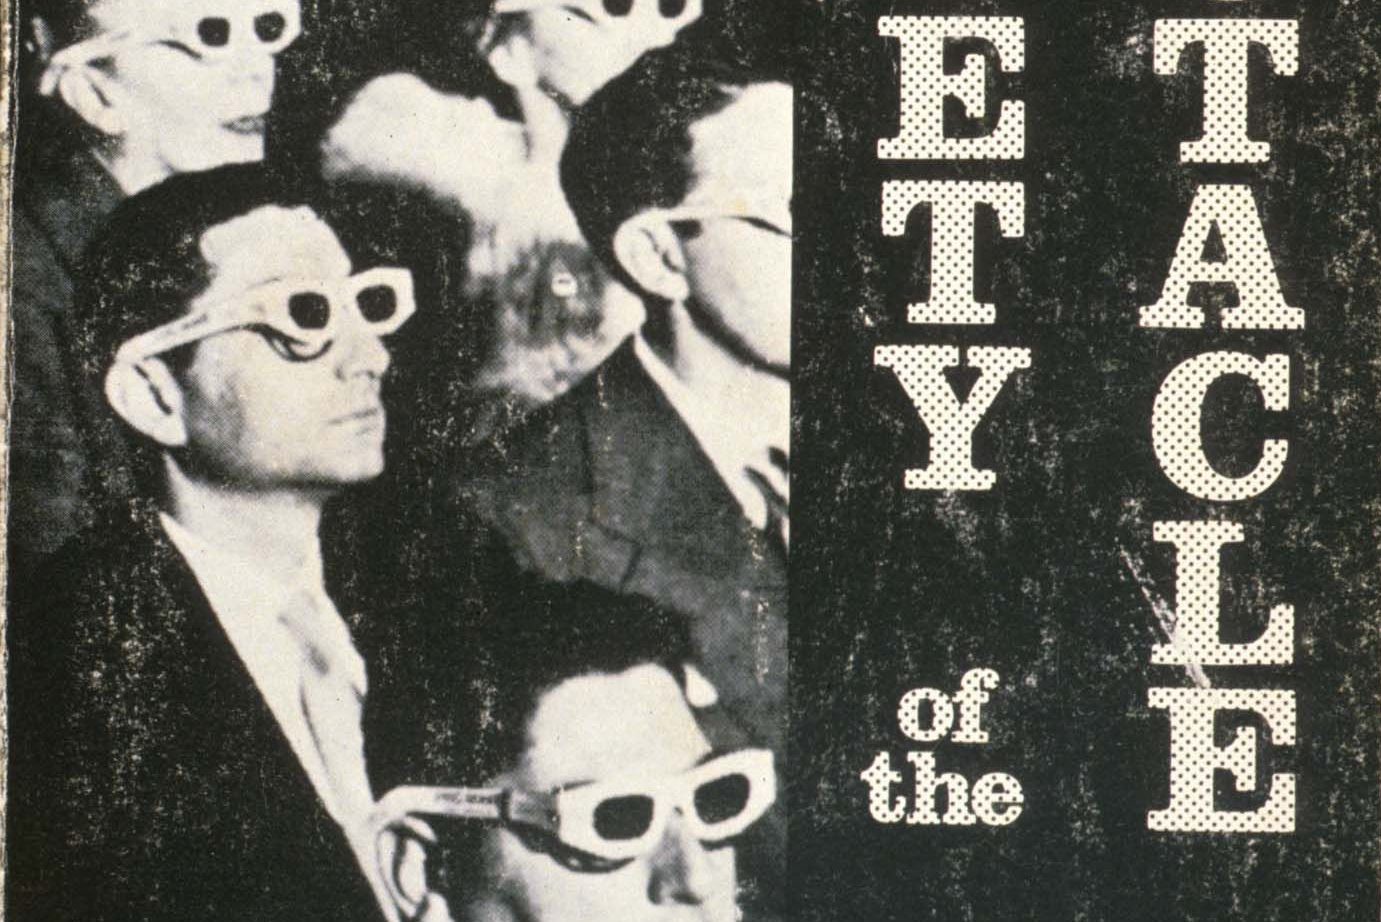 200326 - The Society of the Spectacle affiche by Guy Debord - La Déviation